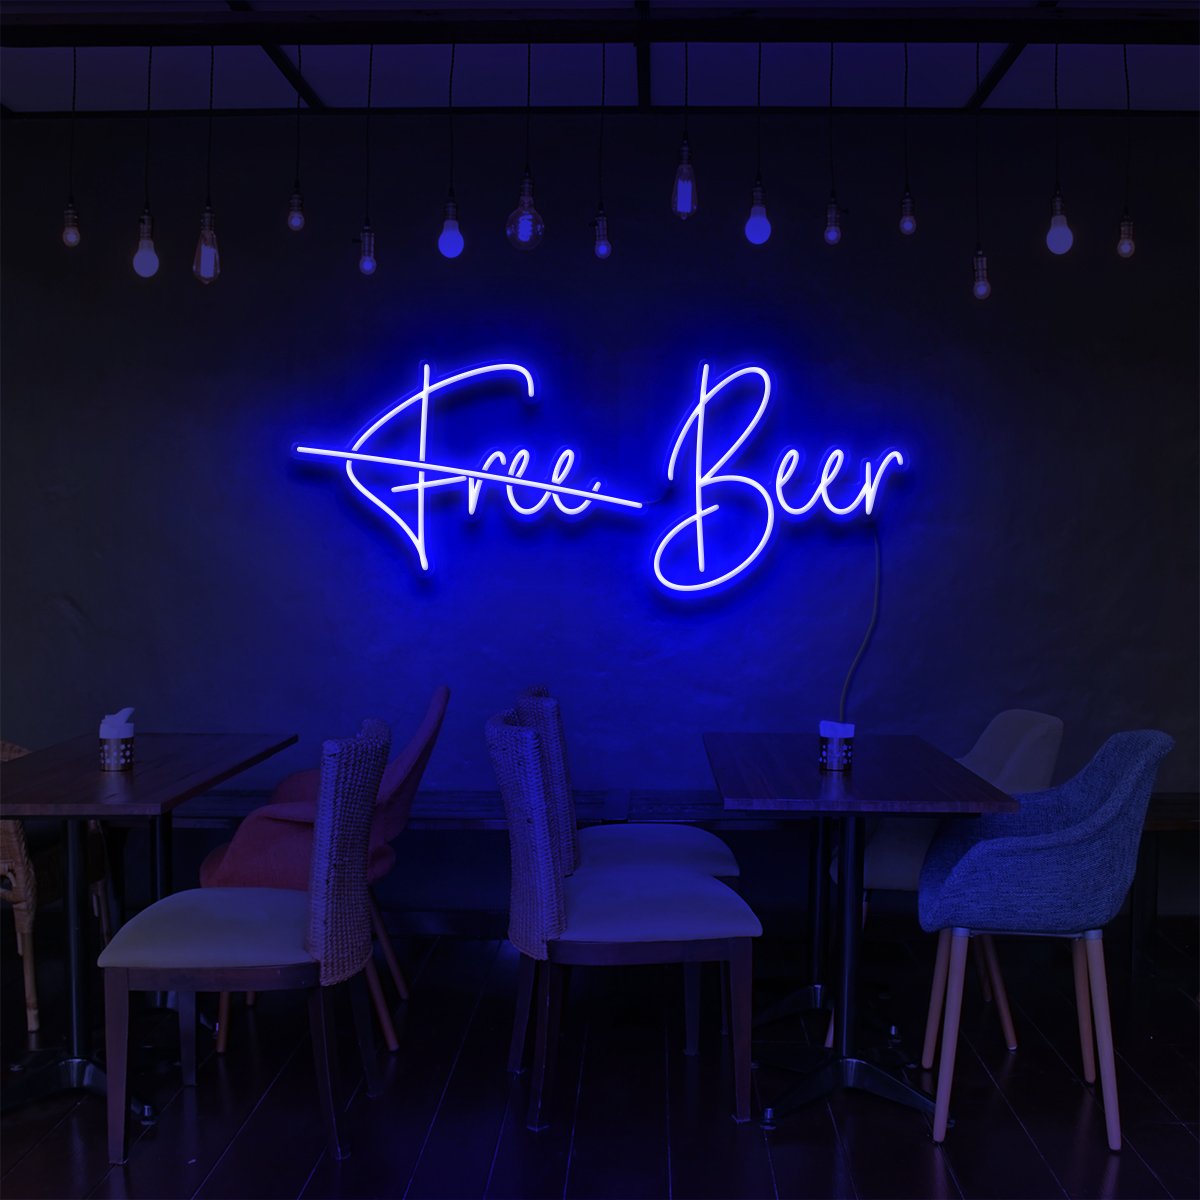 "Free Beer" Neon Sign for Bars & Restaurants 60cm (2ft) / Blue / LED Neon by Neon Icons